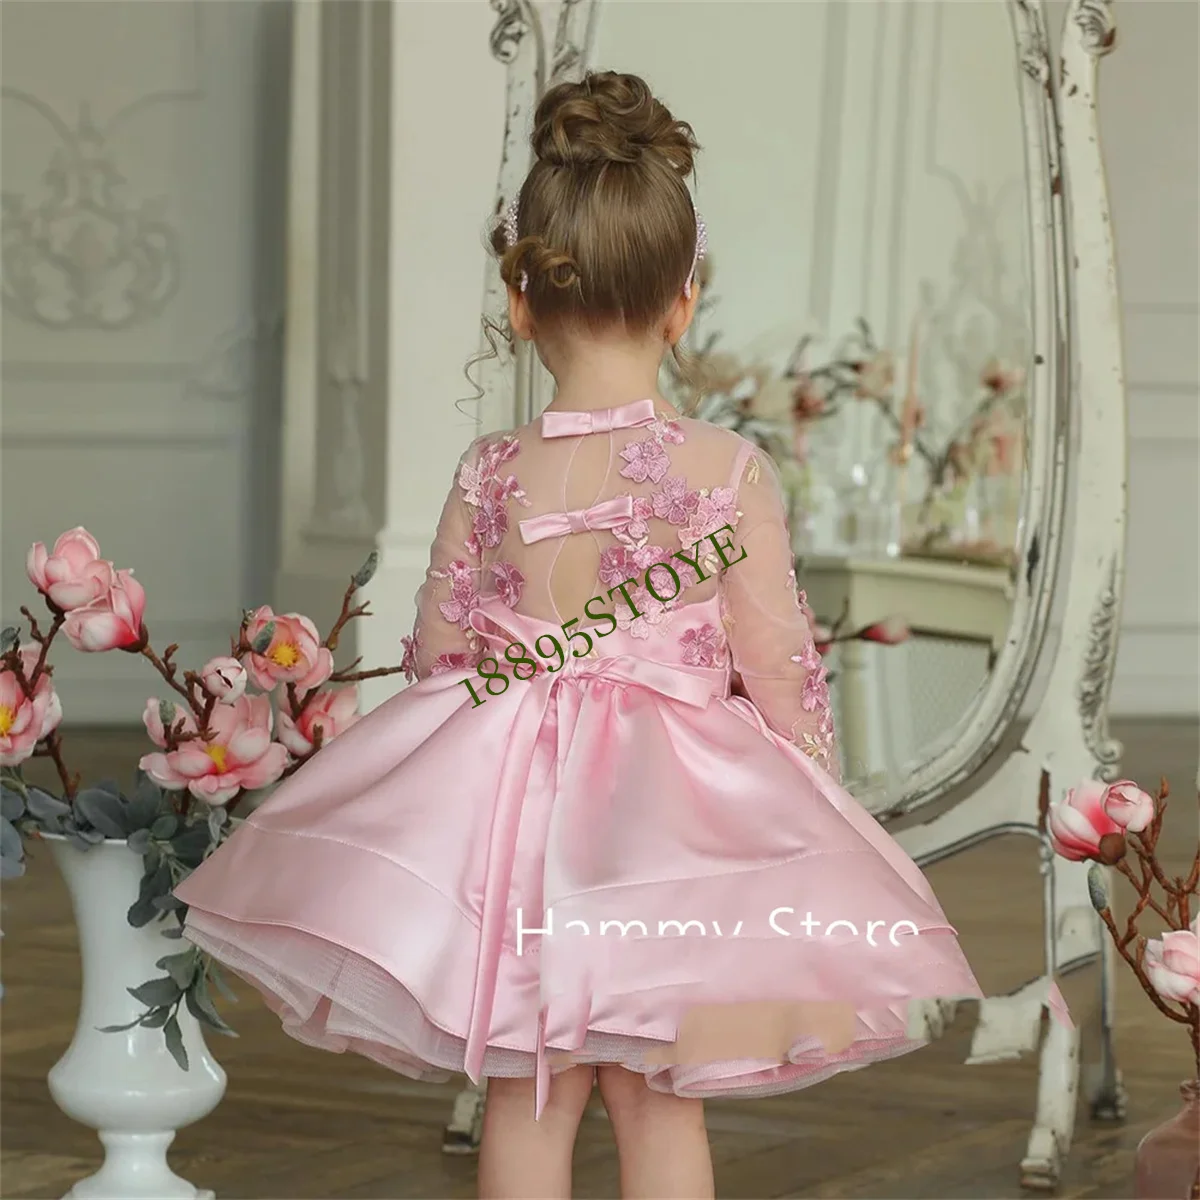 

Pink Satin Flower Girl Dress Round Neck Long Sleeves Flowers Puffy Birthday Party Gown for Pageant First Communion Dresses